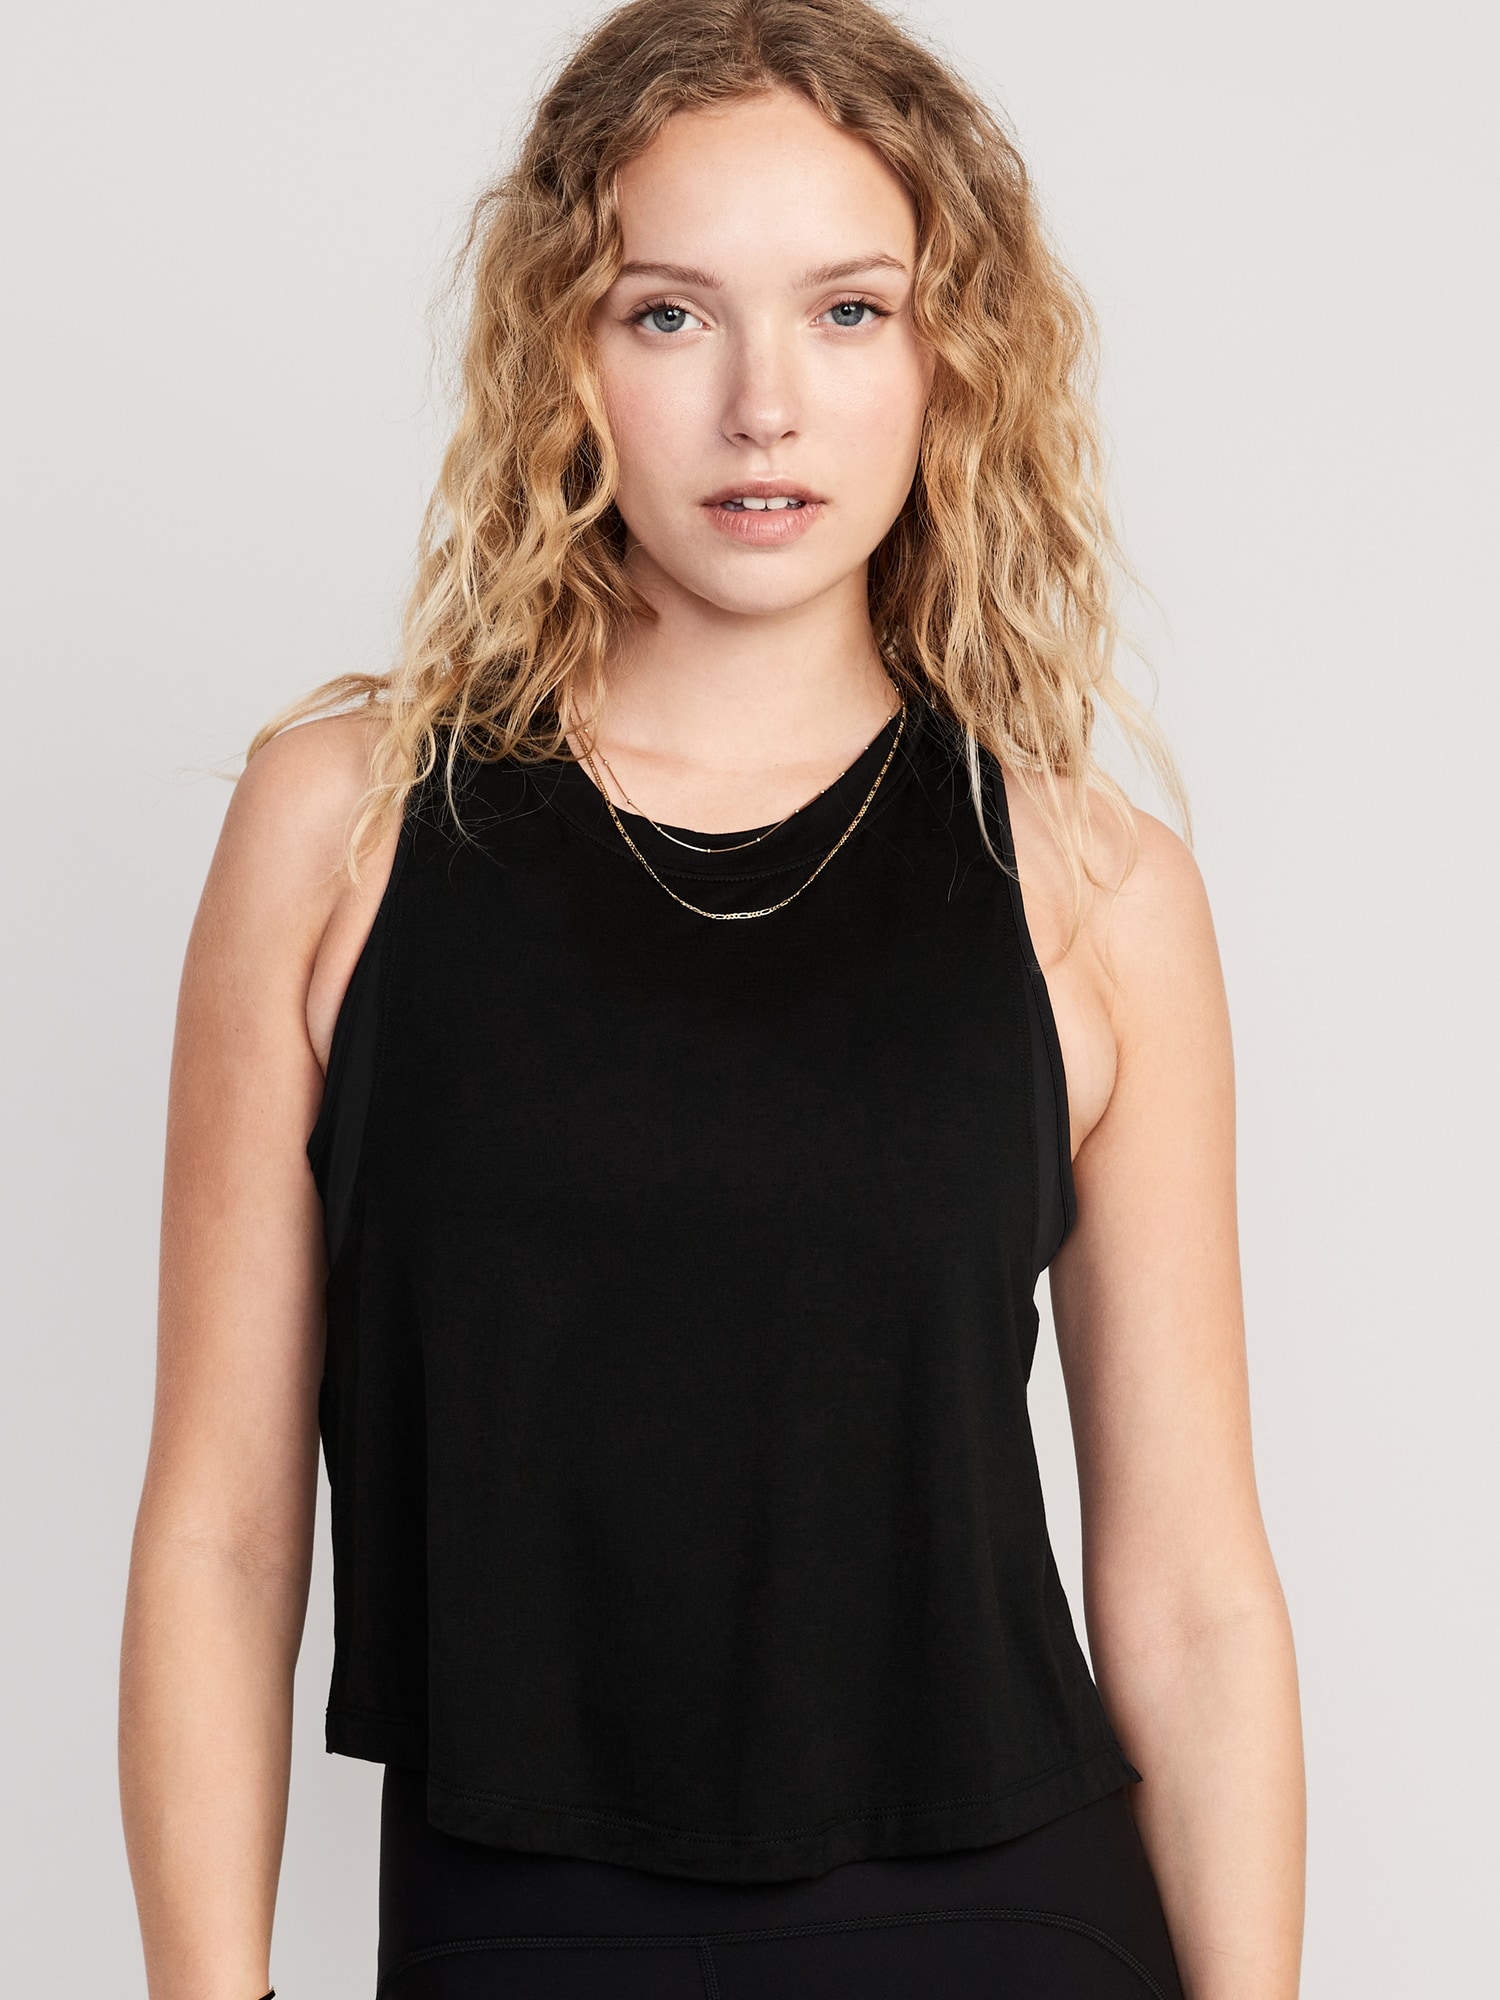 Old Navy UltraLite Sleeveless Cropped Top for Women black. 1